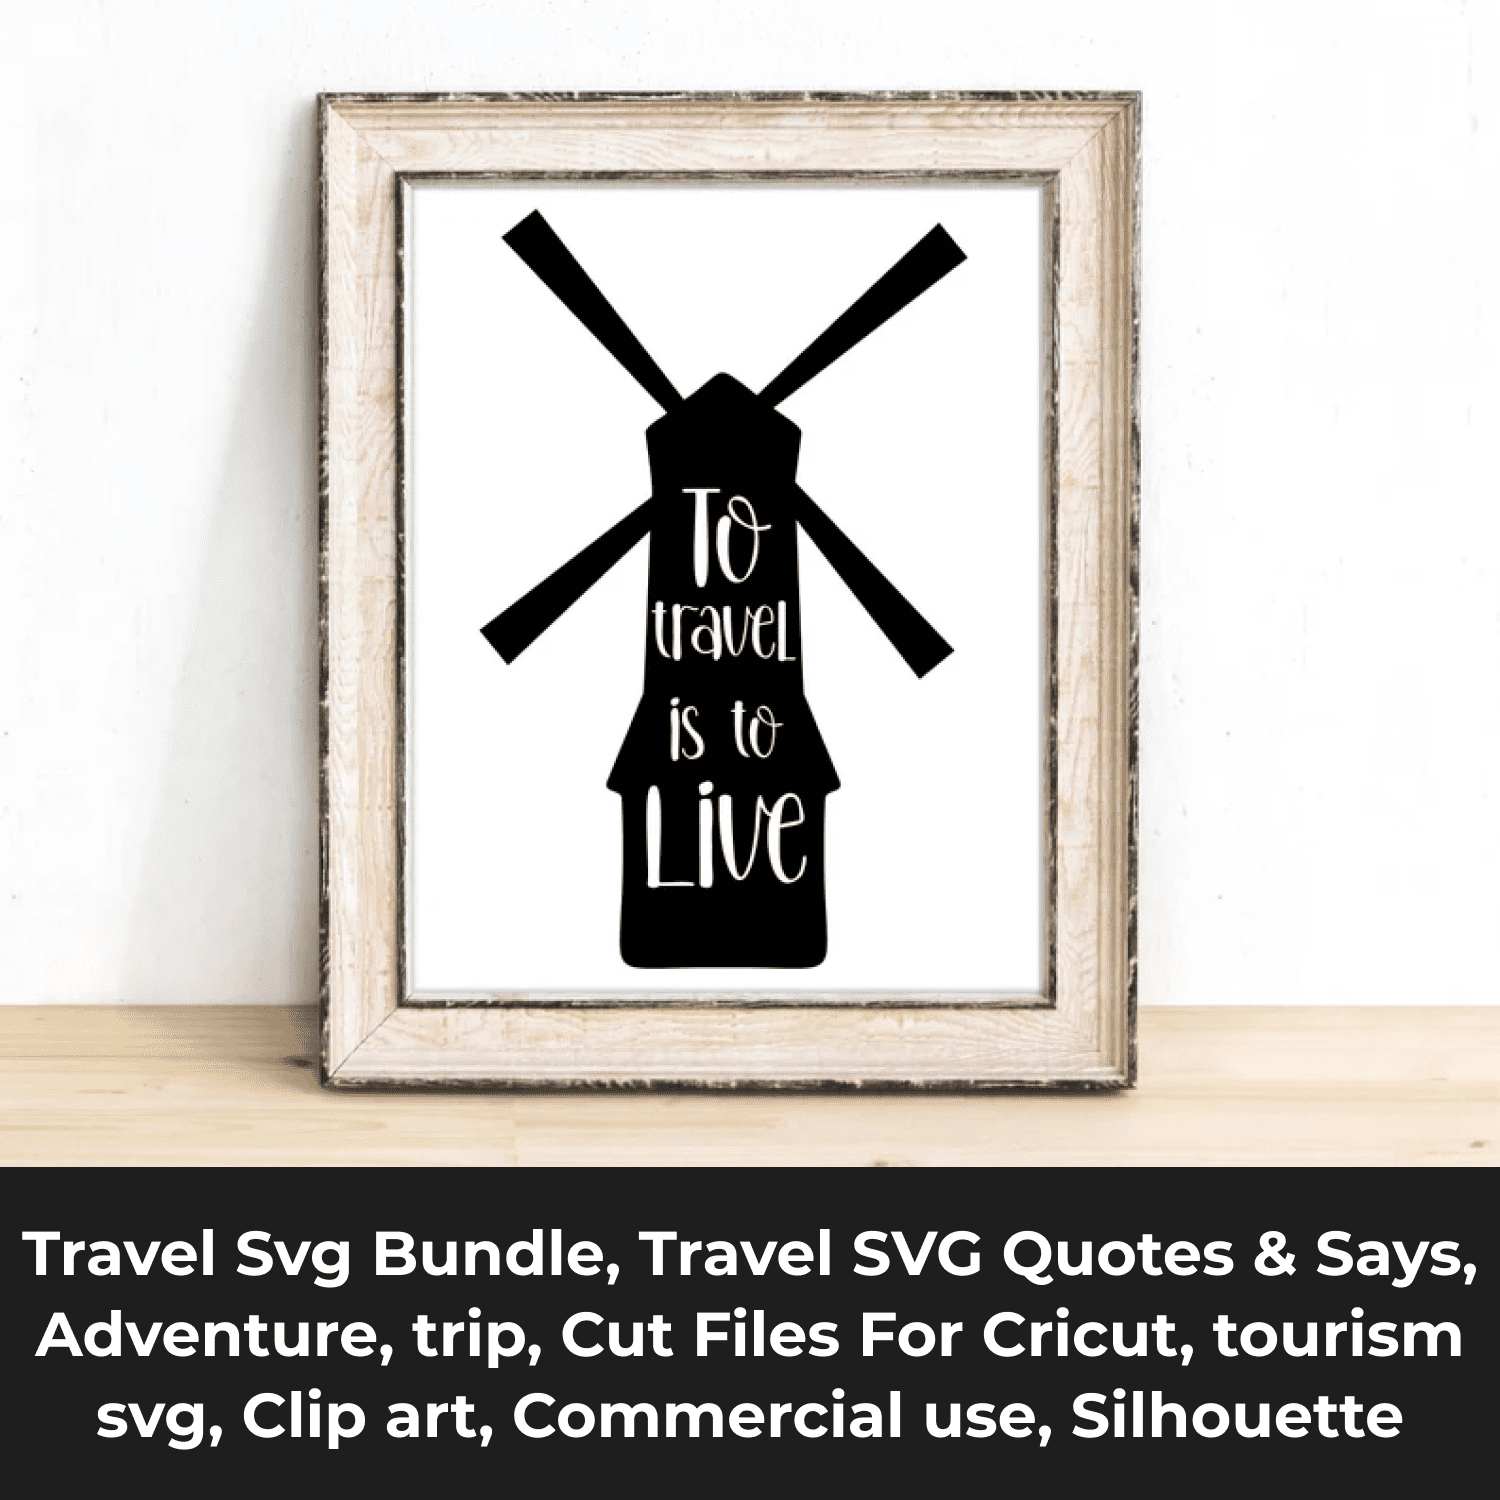 Travel SVG Quotes & Sayings cover.